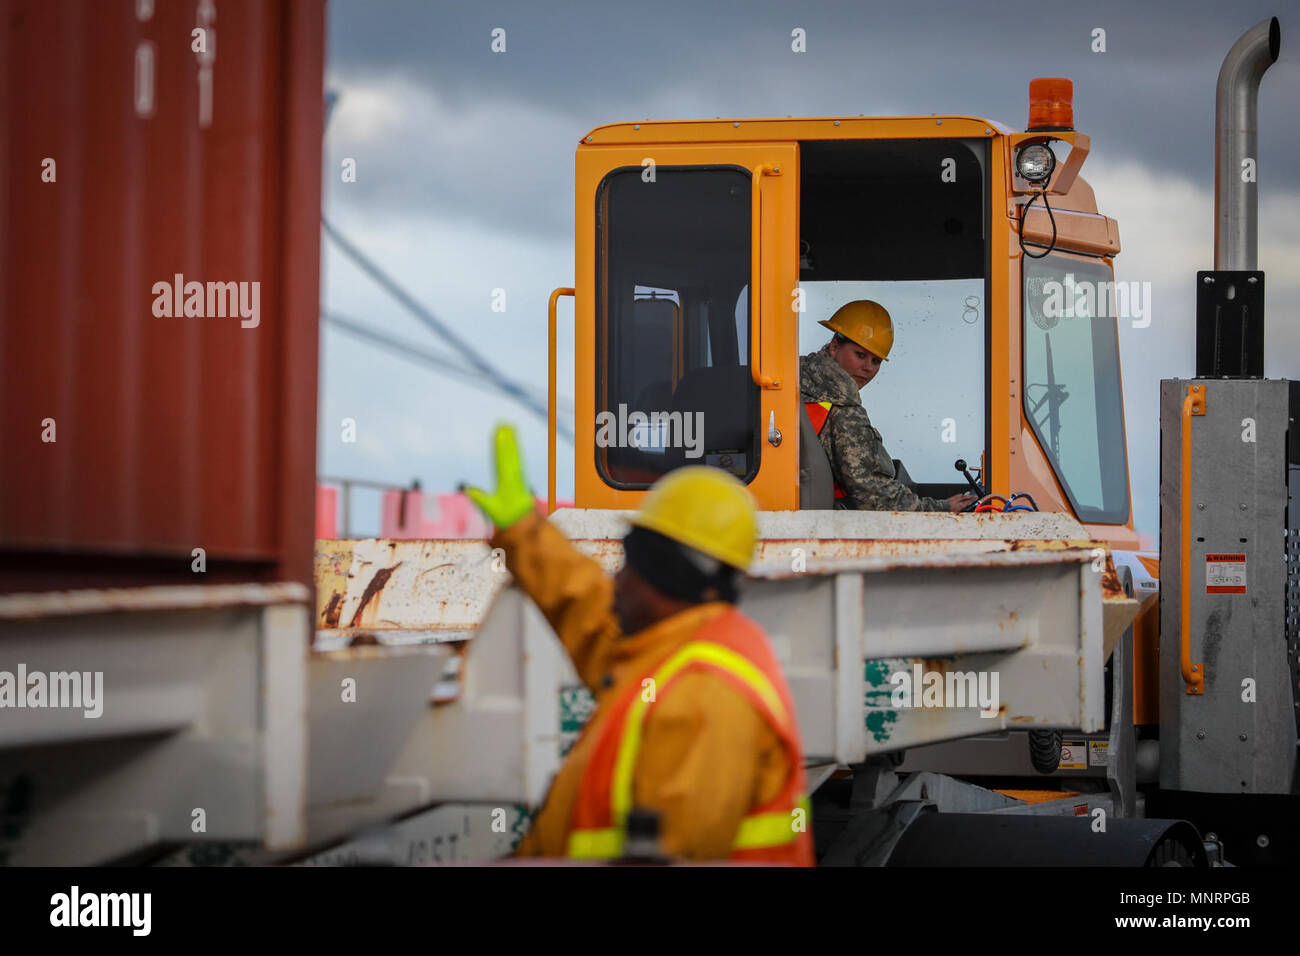 A U.S. Army Reserve Soldier observes the loading of a Twenty-foot equivalent unit container during Operation Trans Mariner 18 West at Military Ocean Terminal Concord, California, Mar. 2, 2018. Trans Mariner 18 West is a real-world strategic mission utilizing U.S. Army Reserve, National Guard and Active component Soldiers to conduct Port Operations allowing Army materiel and munitions containers for travel onward. Stock Photo